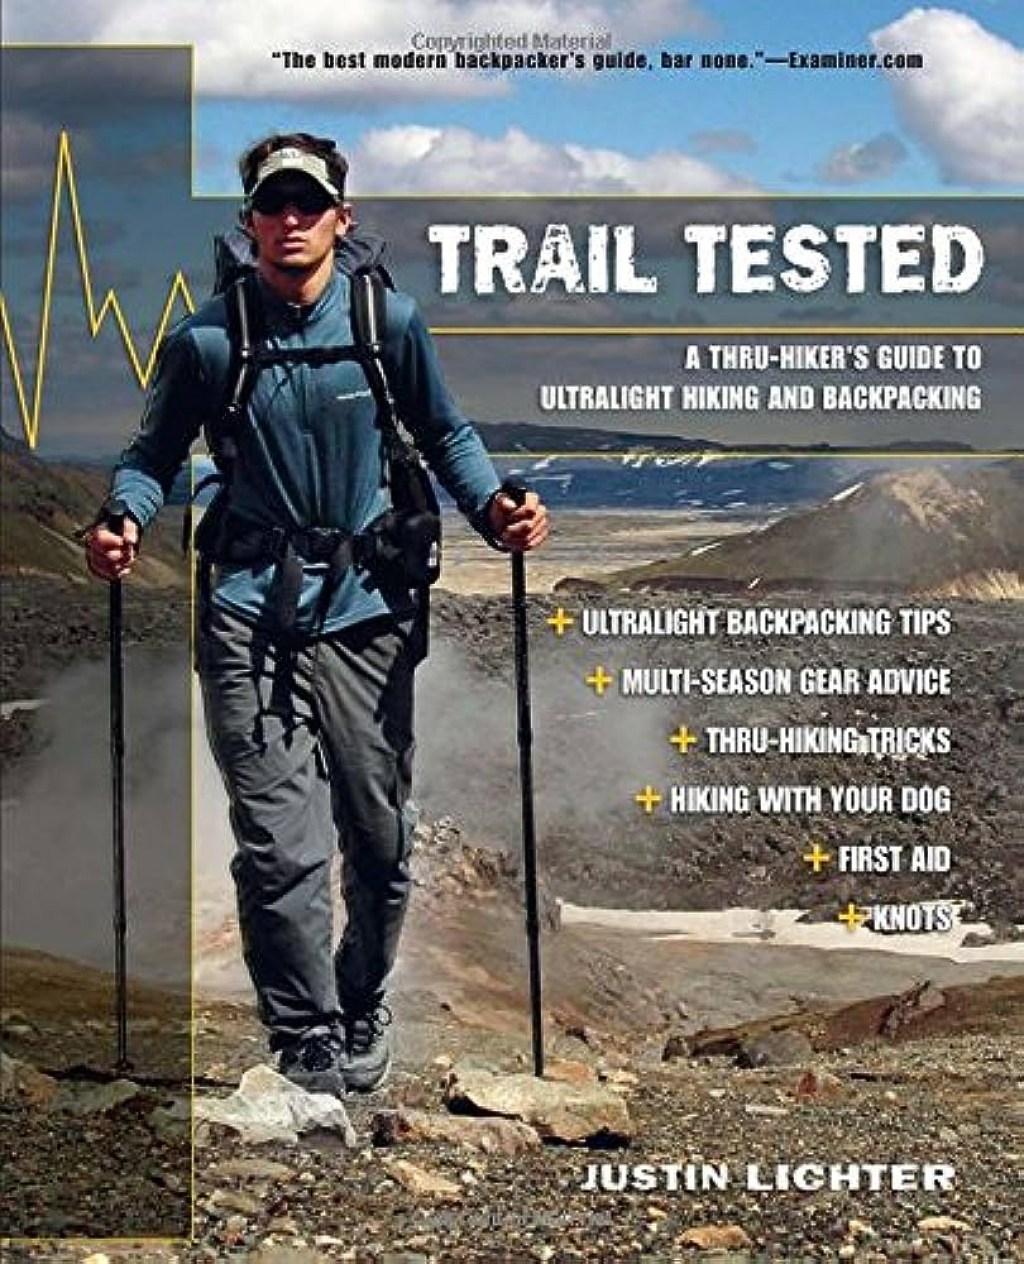 Picture of: Trail Tested: A Thru-Hiker’s Guide To Ultralight Hiking And  BackpackingTrail Tested: A Thru-Hiker’s Guide To Ultralight Hiking And  Backpacking Trail